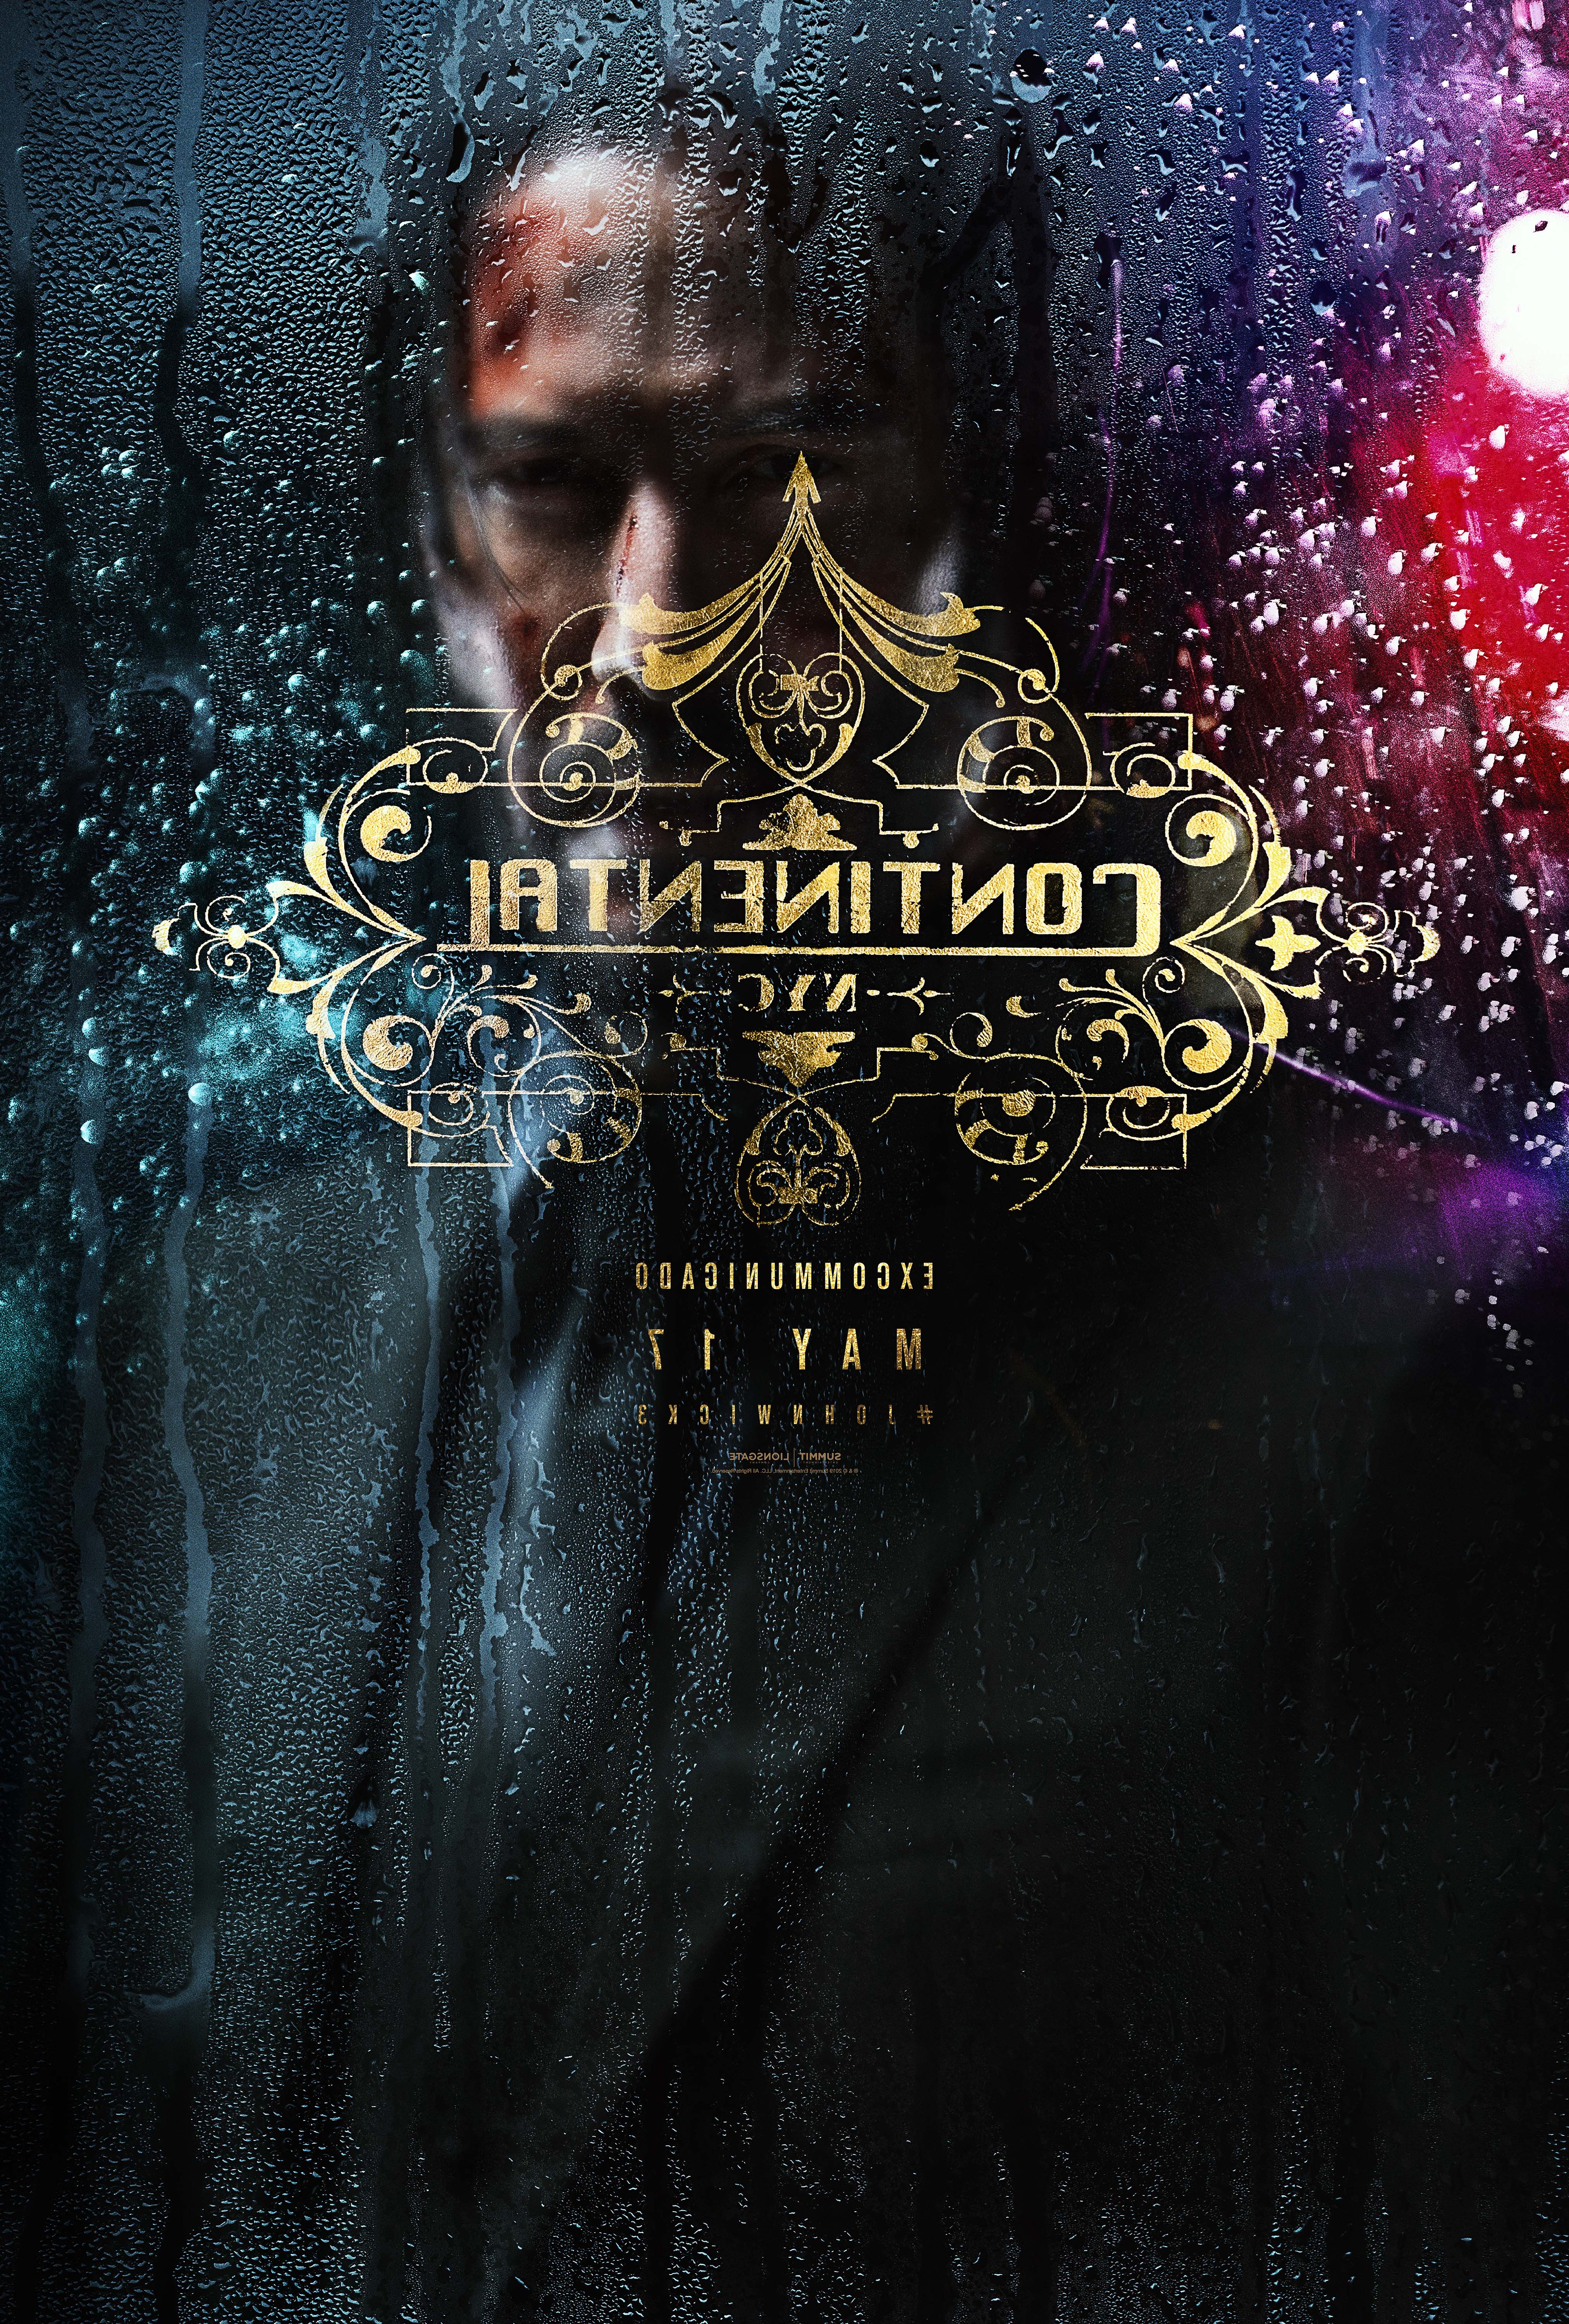 John Wick: Chapter 3 Poster and Full Title Revealed